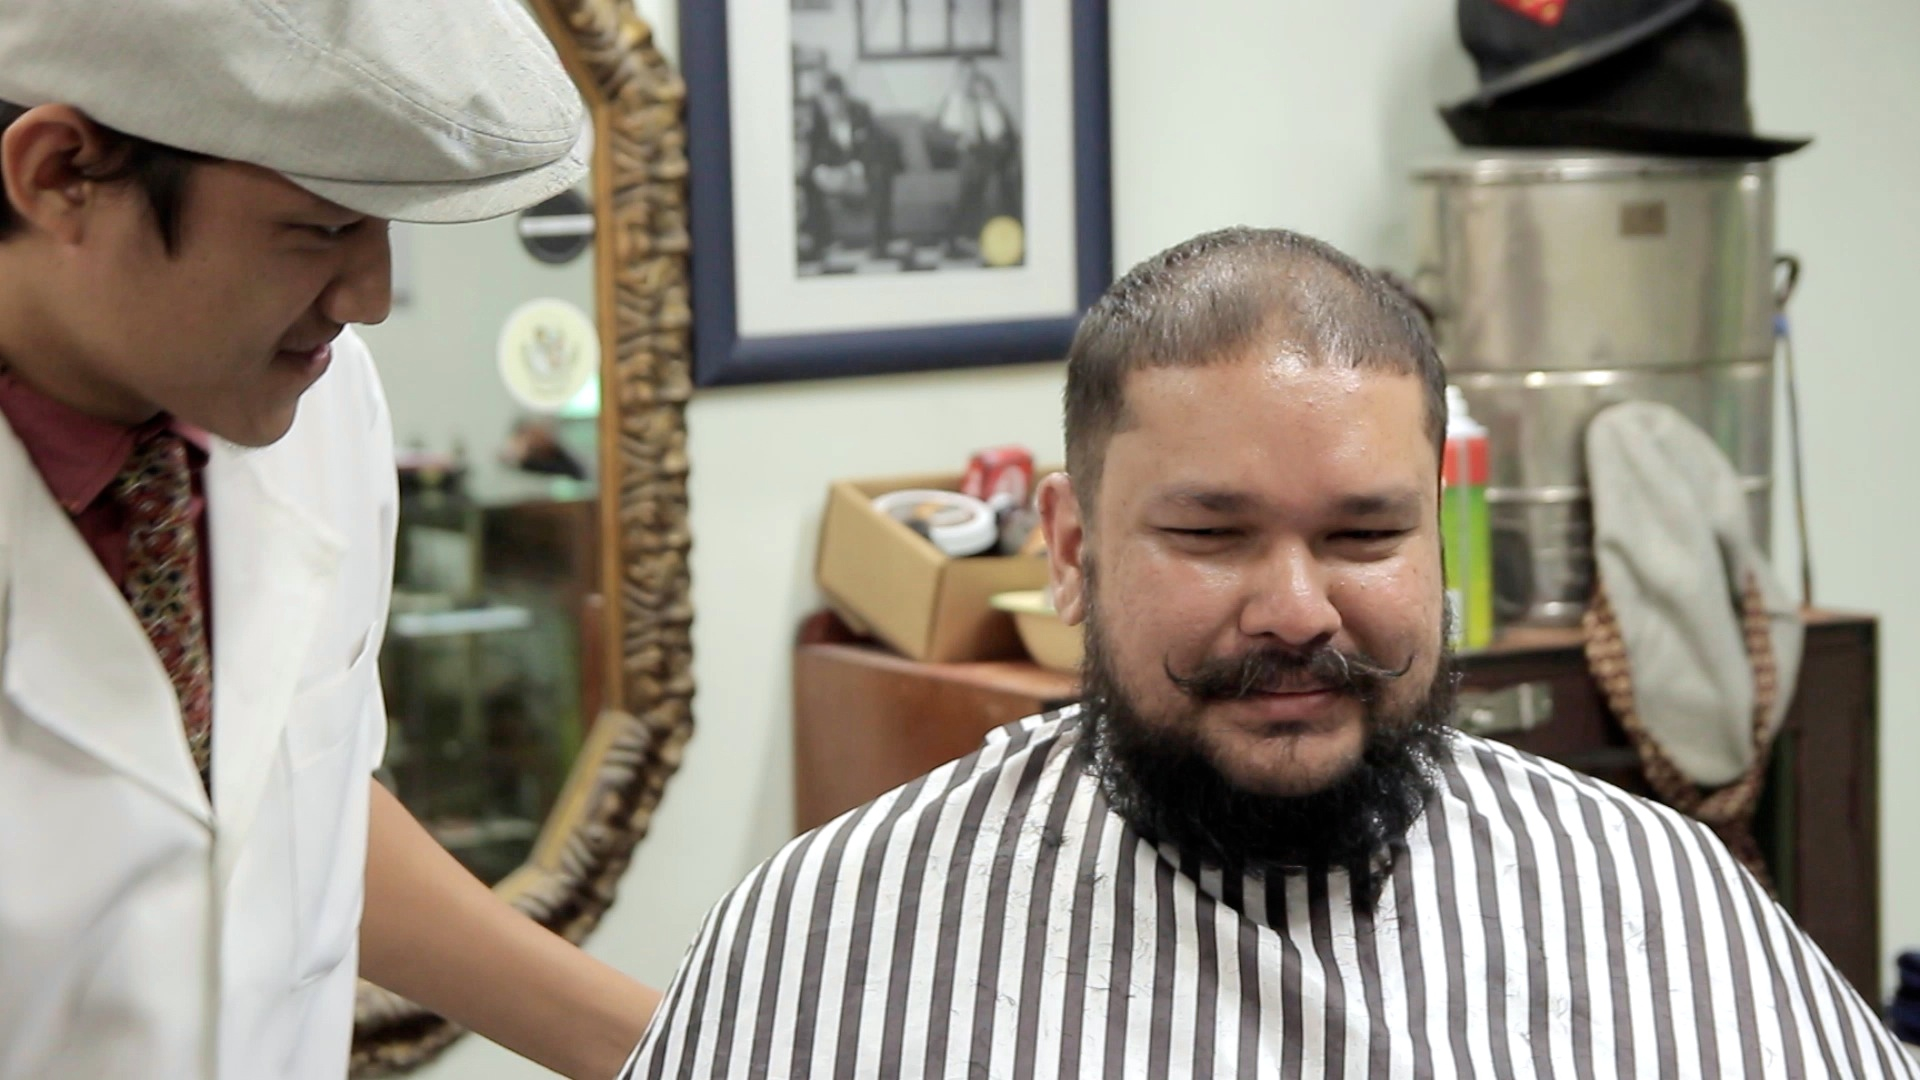 a man is shaving his hair in the barber shop